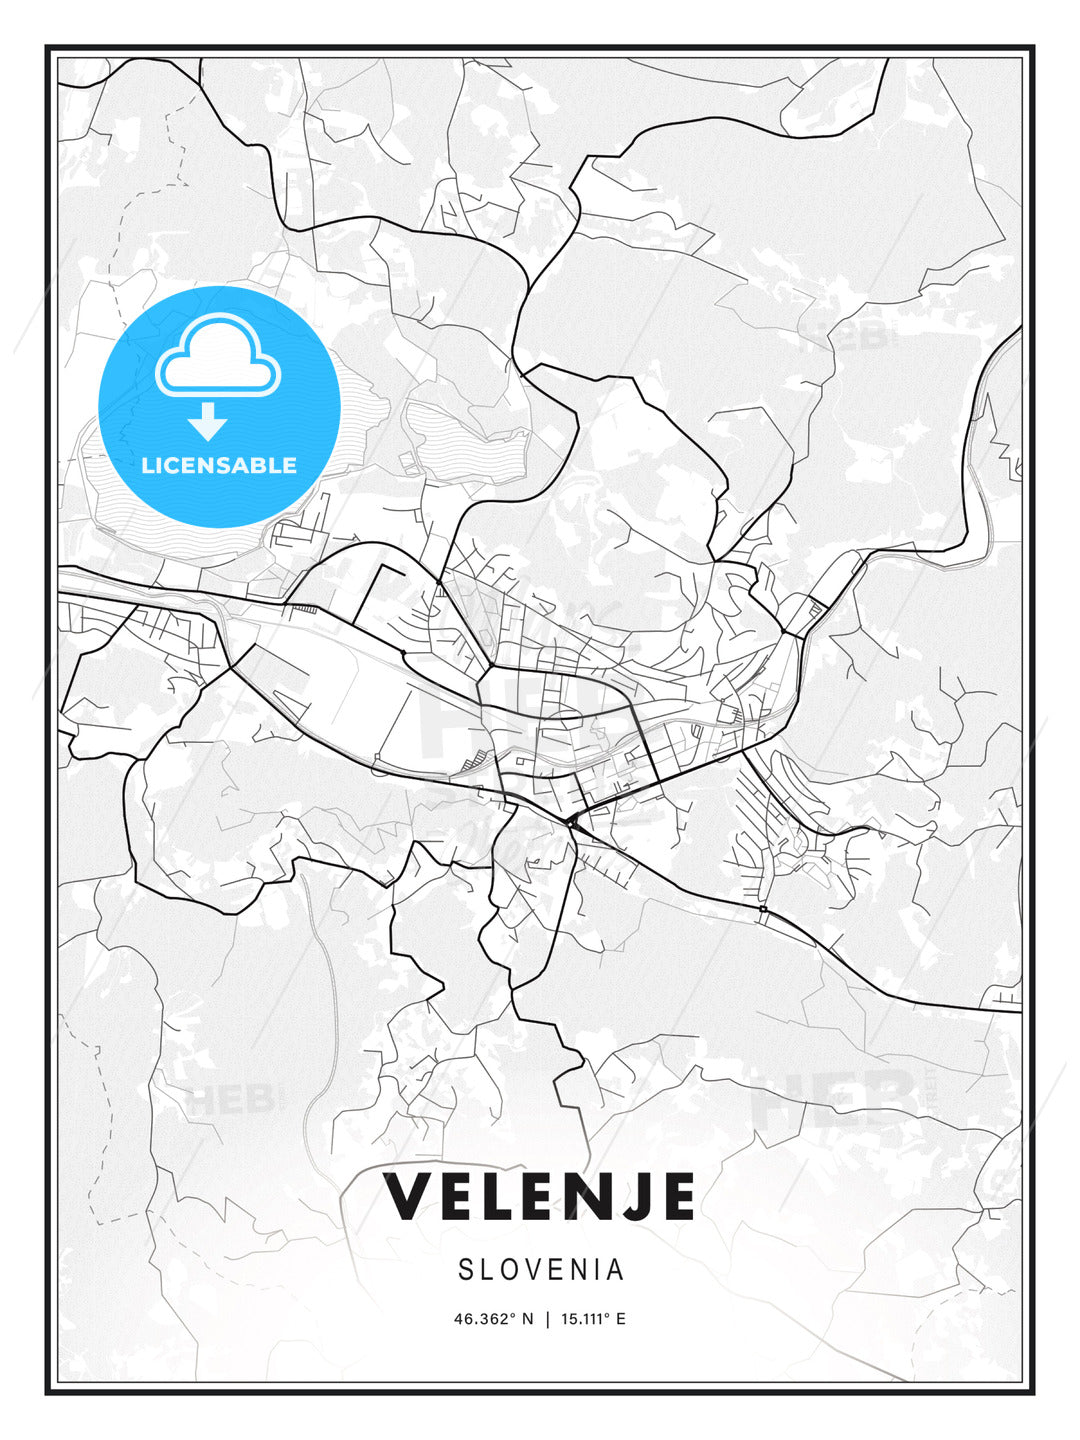 Velenje, Slovenia, Modern Print Template in Various Formats - HEBSTREITS Sketches